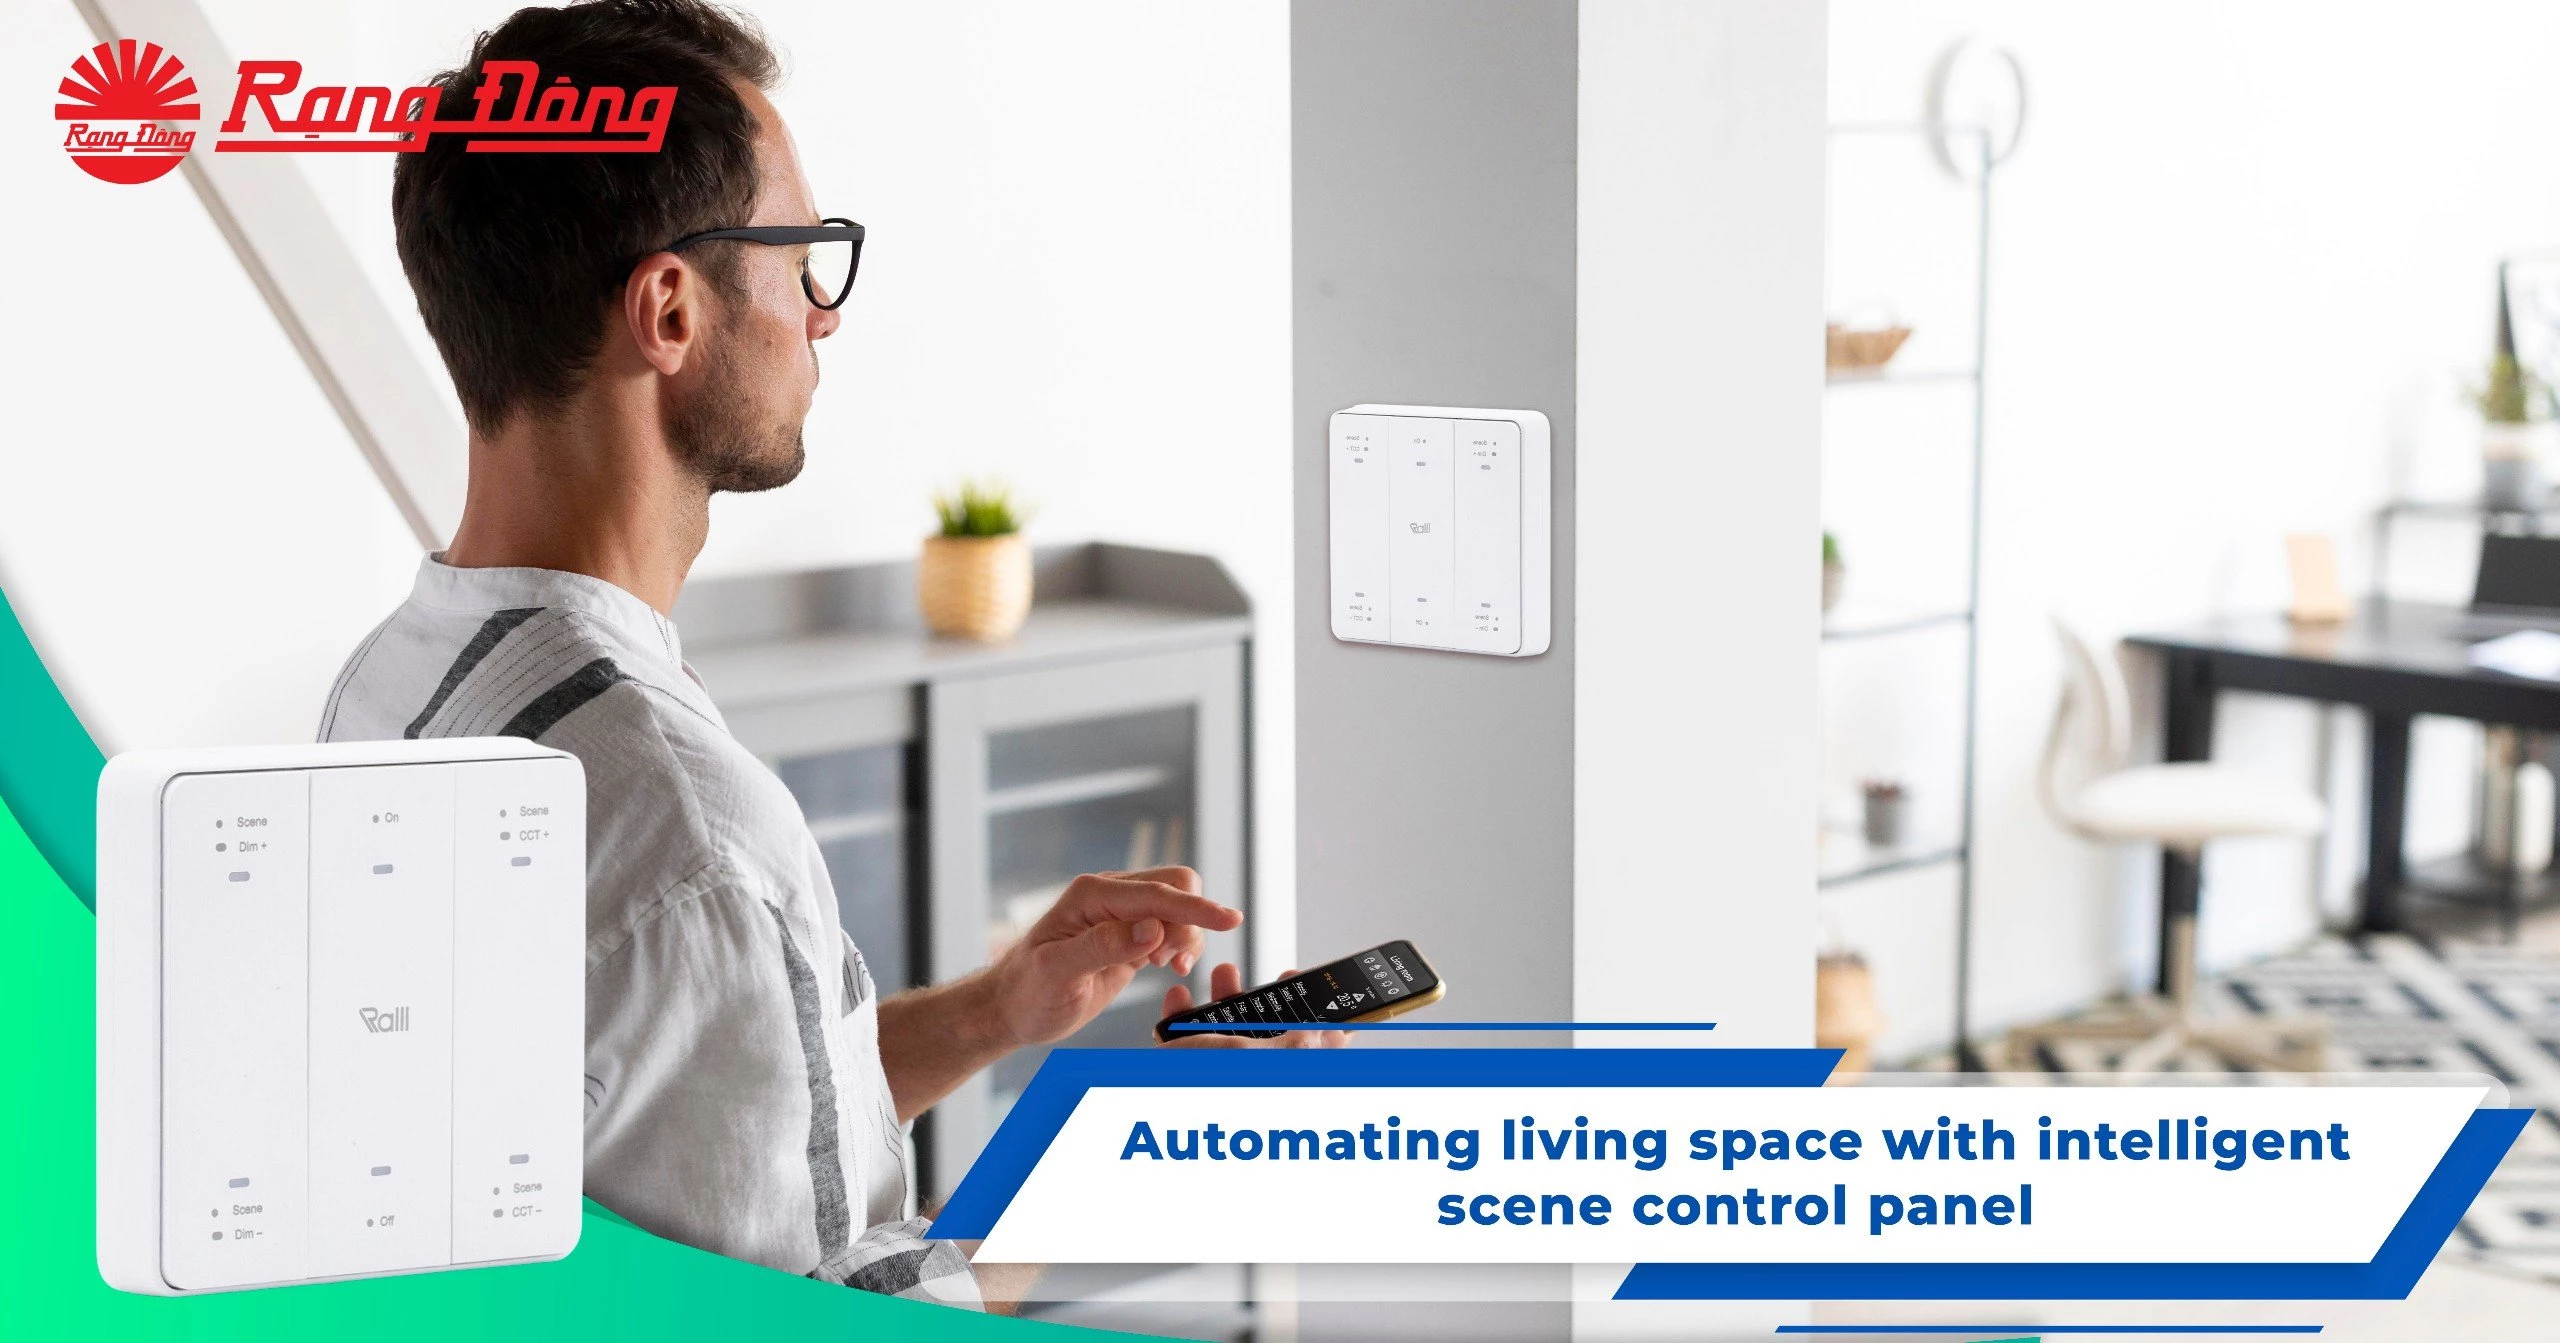 Automating living space with intelligent scene control panel